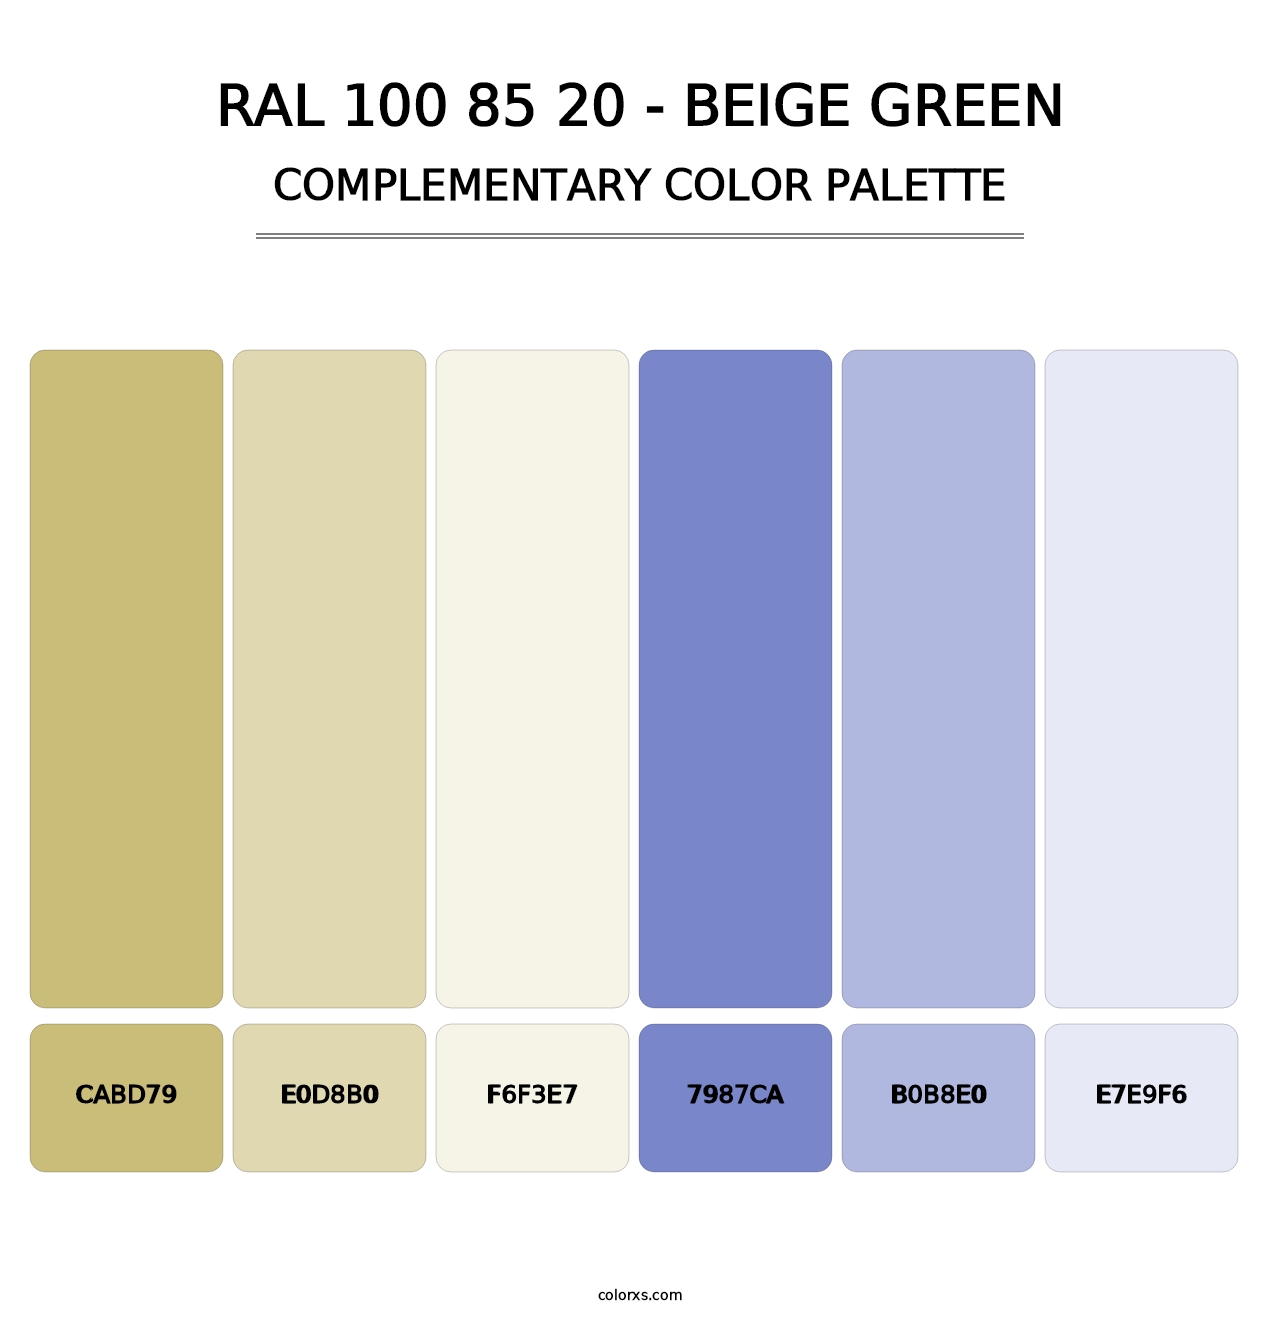 RAL 100 85 20 - Beige Green - Complementary Color Palette